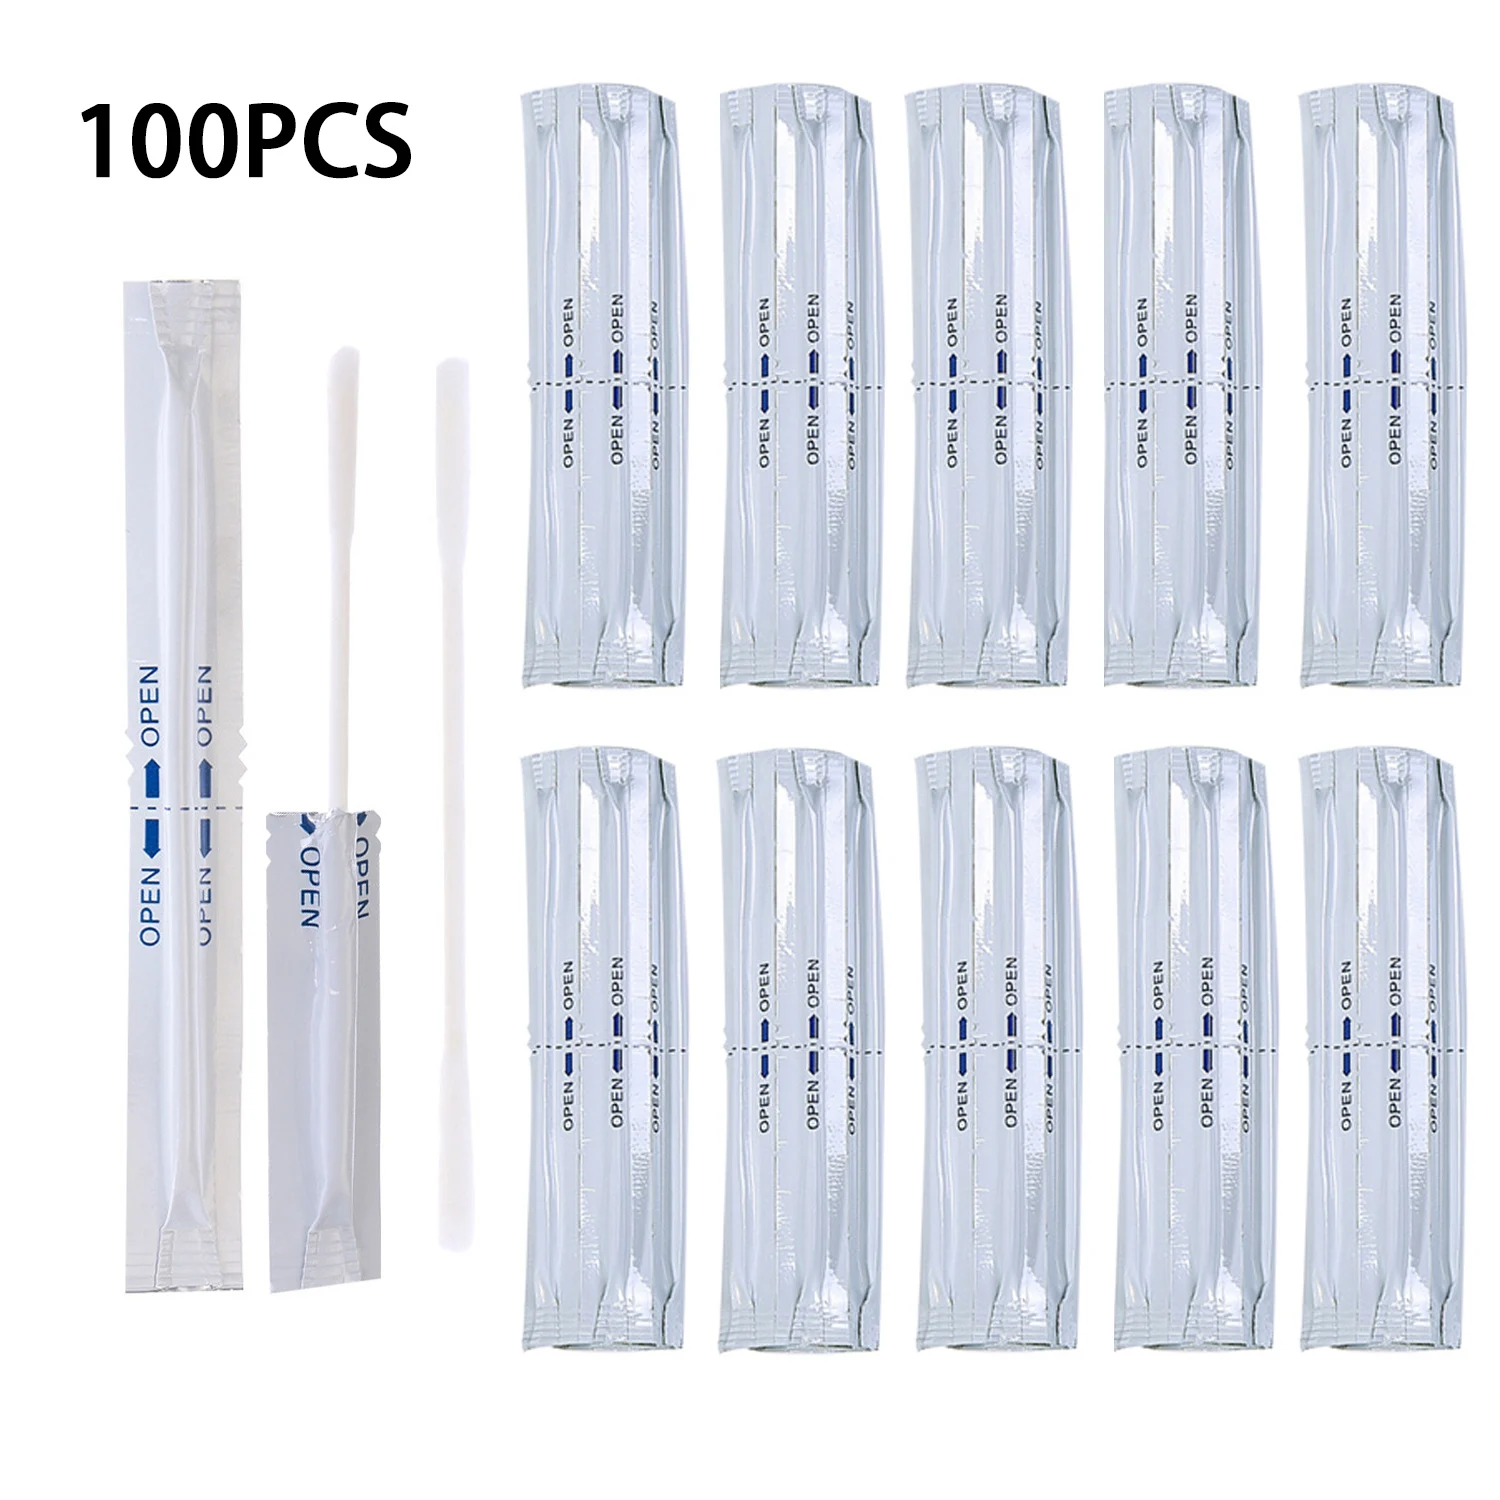 100pcs Wet Cotton Swabs Double Head Cleaning Stick For IQOS 3 Duo 3.0 Duo 3 2.4 PLUS LIL/LTN/HEETS/GLO Heater Cleaner Tools